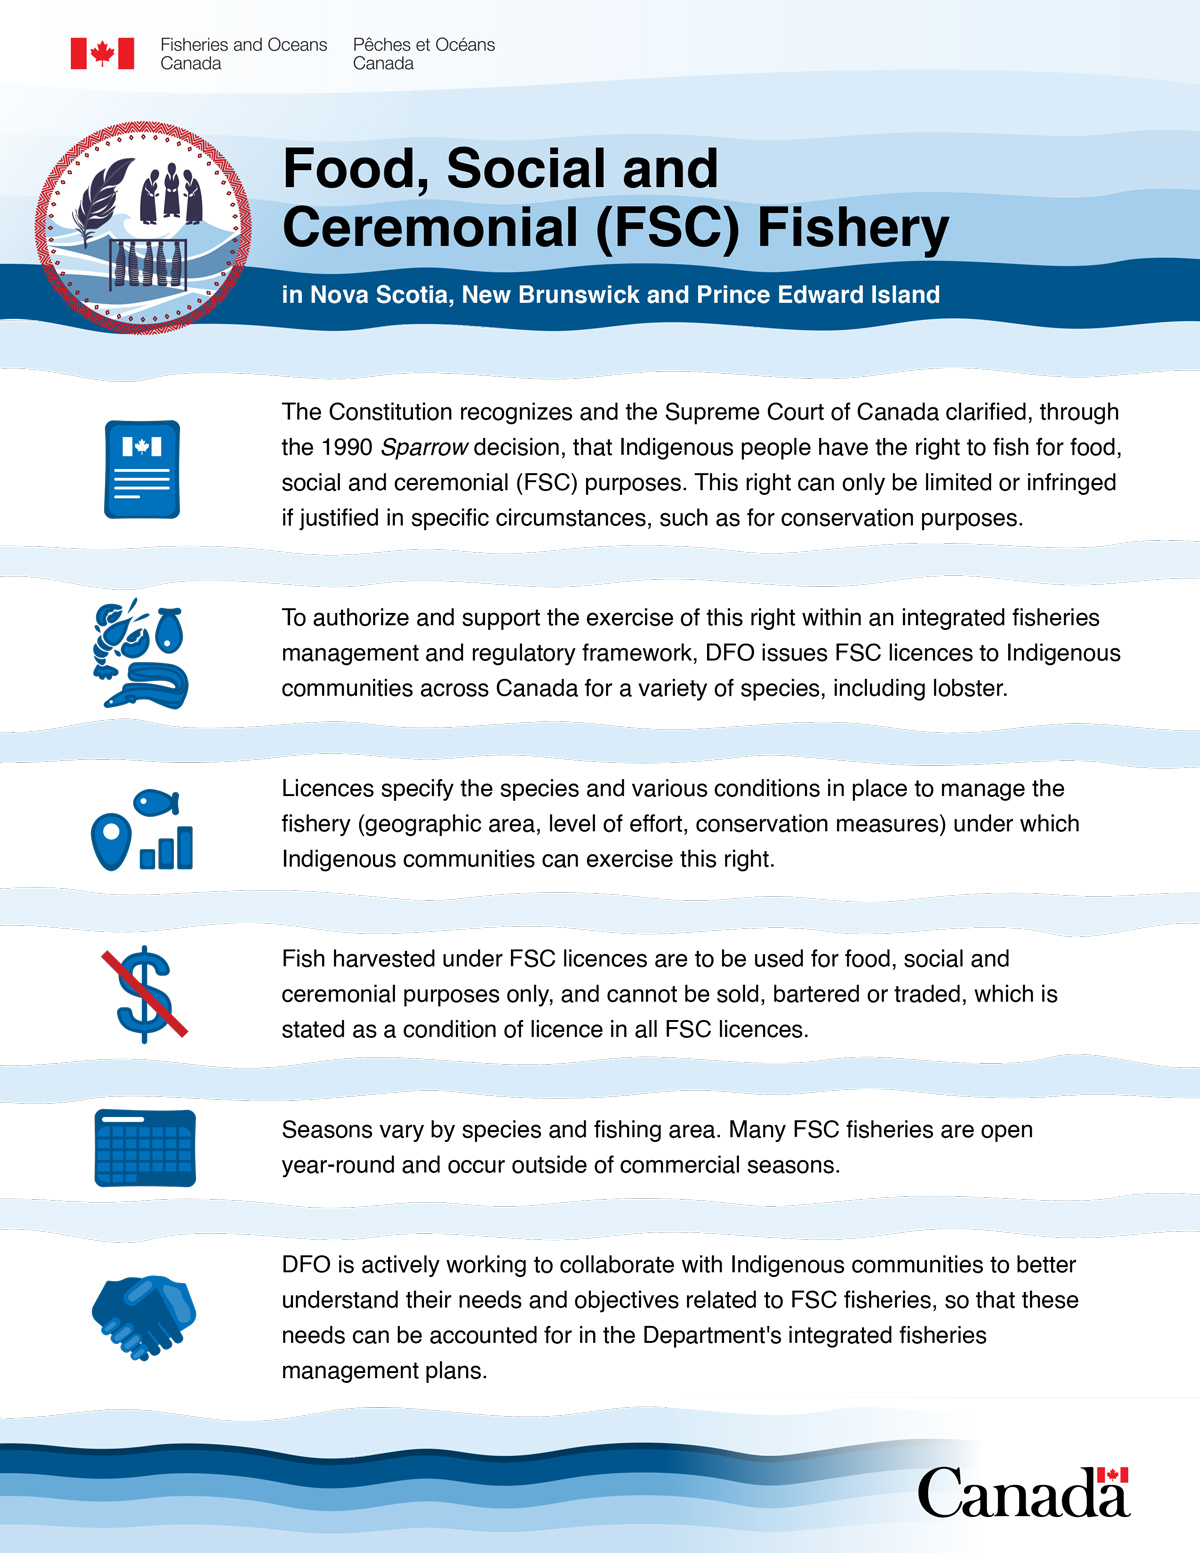 Infographic: Food, Social and Ceremonial (FSC) Fishery in Nova Scotia, New Brunswick and Prince Edward Island